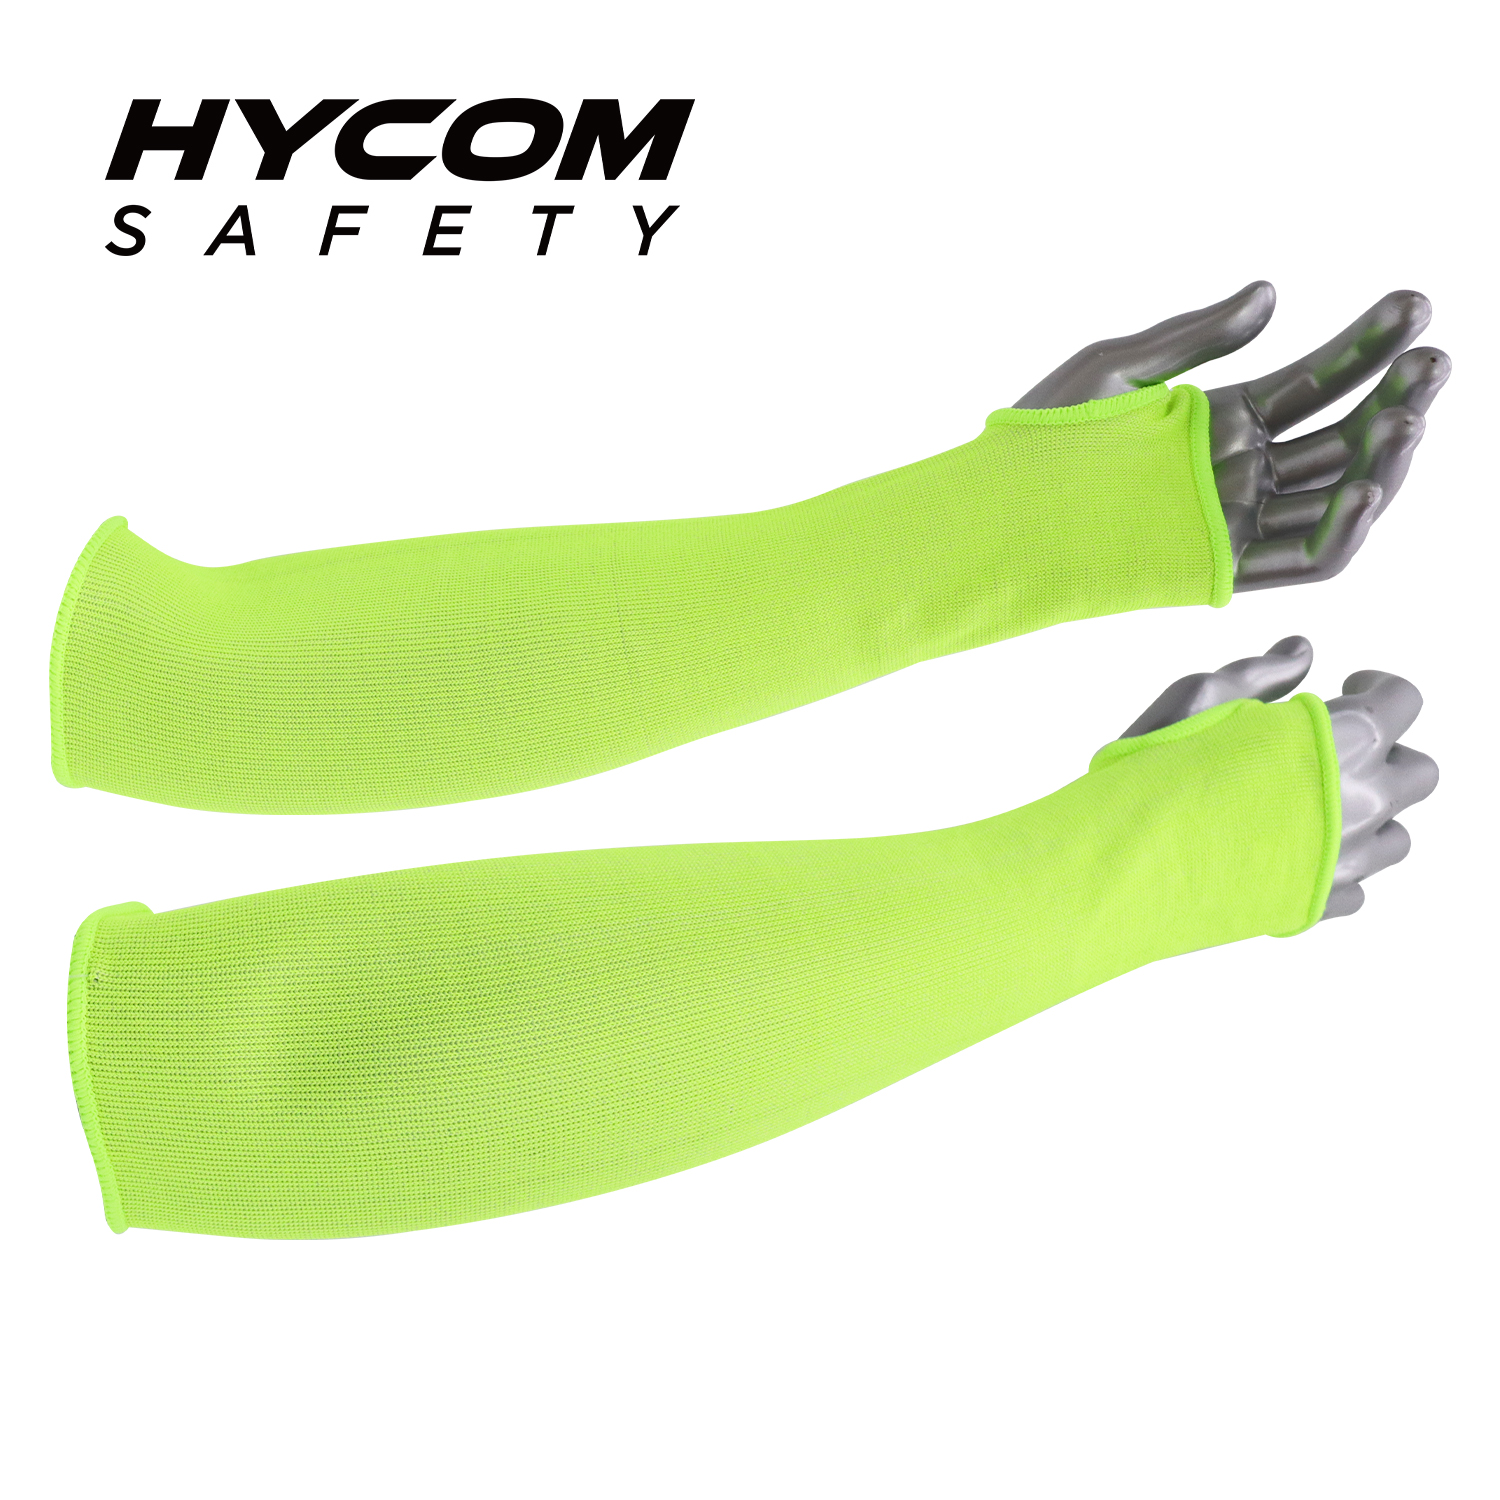 HYCOM Cut Level 4 Green Cut Resistant Arm Cover Sleeve with Thumb Slot For Work Safety